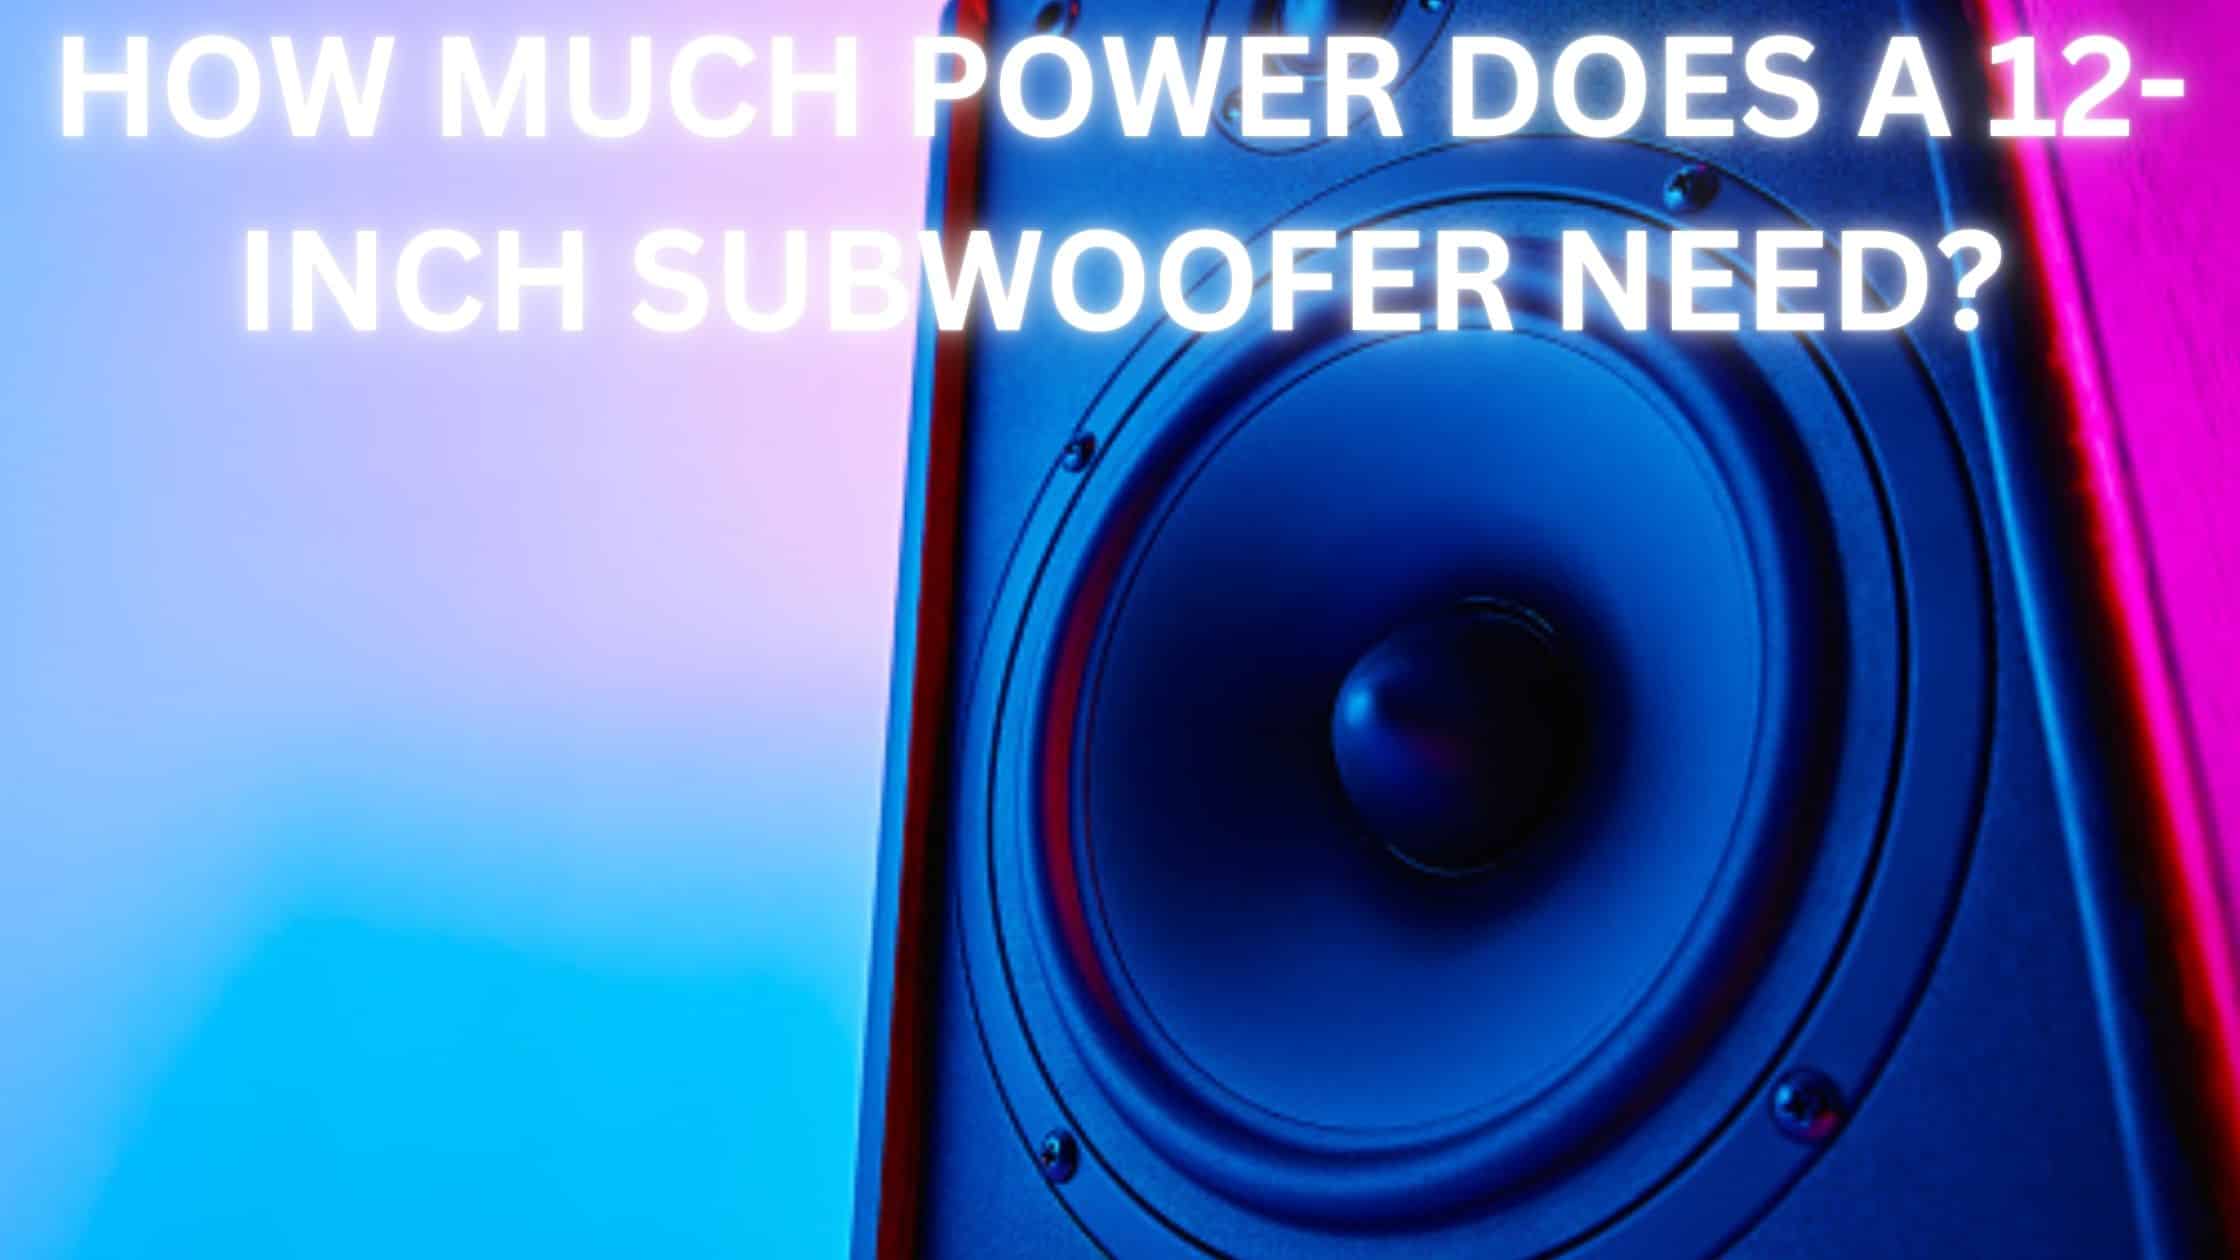 HOW MUCH POWER DOES A 12-INCH SUBWOOFER NEED